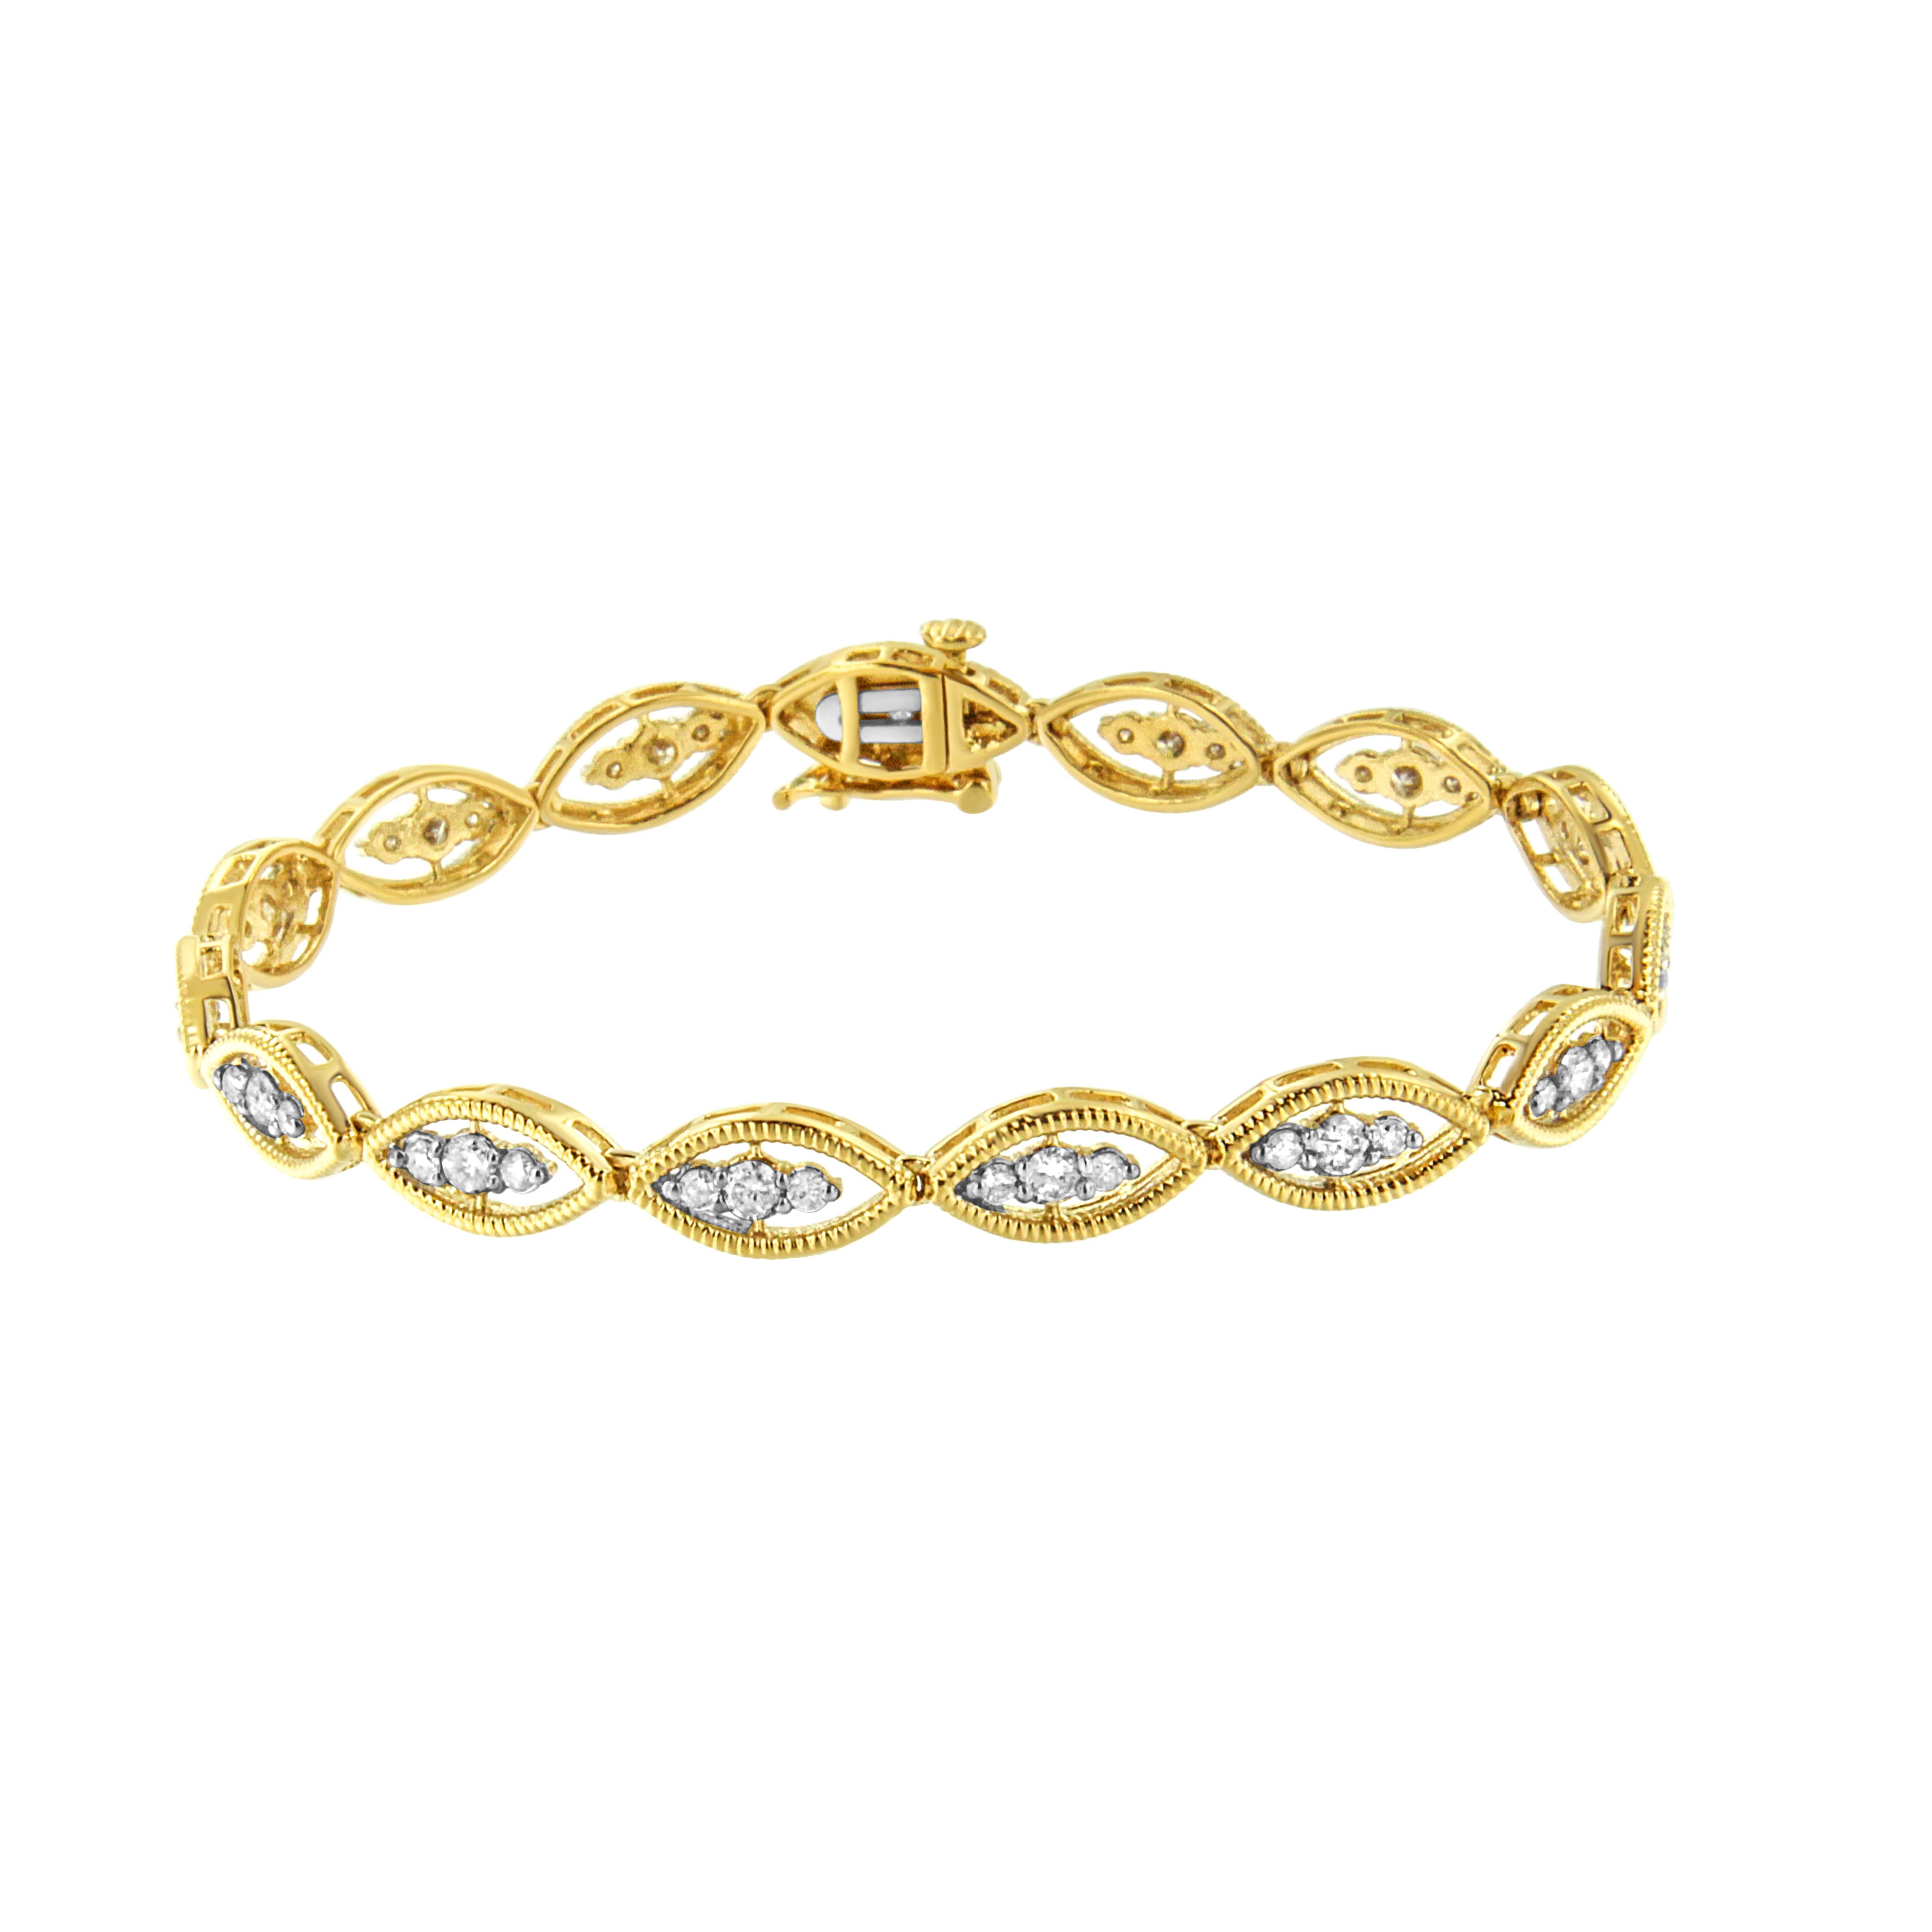 This gorgeous link bracelet is perfect for any occasion. Yellow gold textured ribbons create open almond shaped links. Inside each of the links 3 prong set round cut diamond glimmer. 14 links make up this 10k yellow gold plated sterling silver